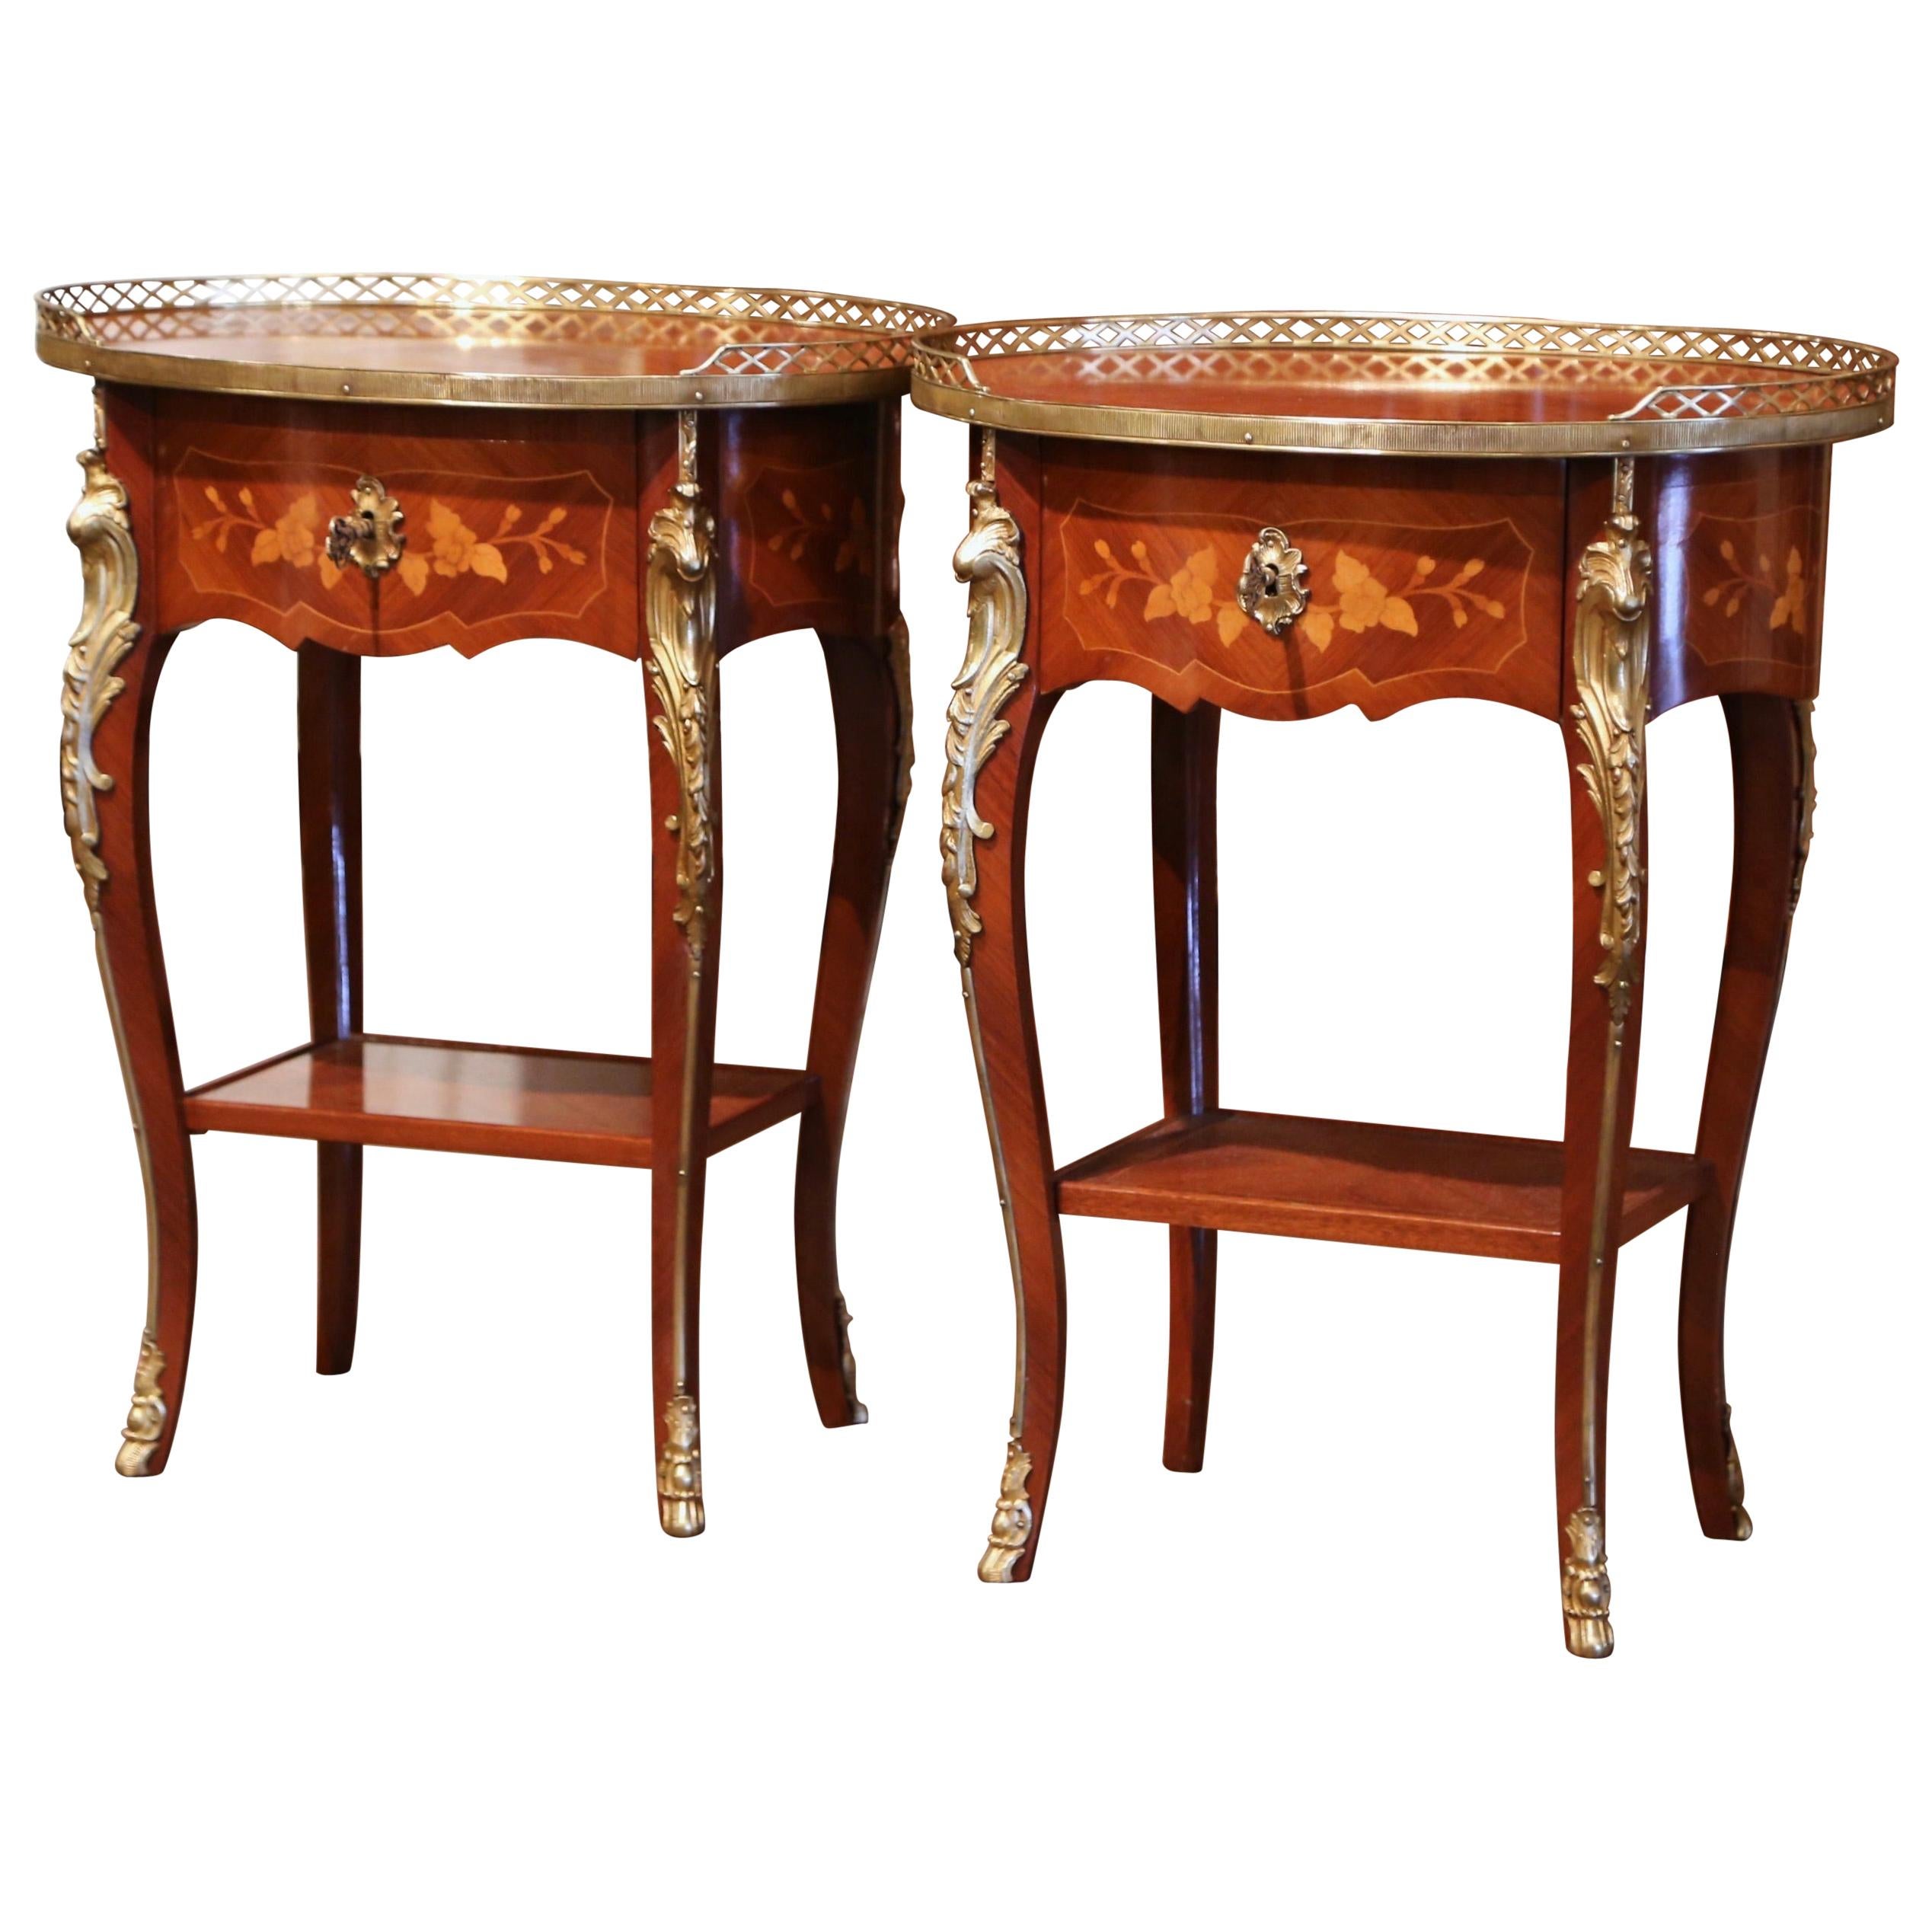 Pair of Early 20th Century French Louis XV Walnut Marquetry & Brass Side Tables